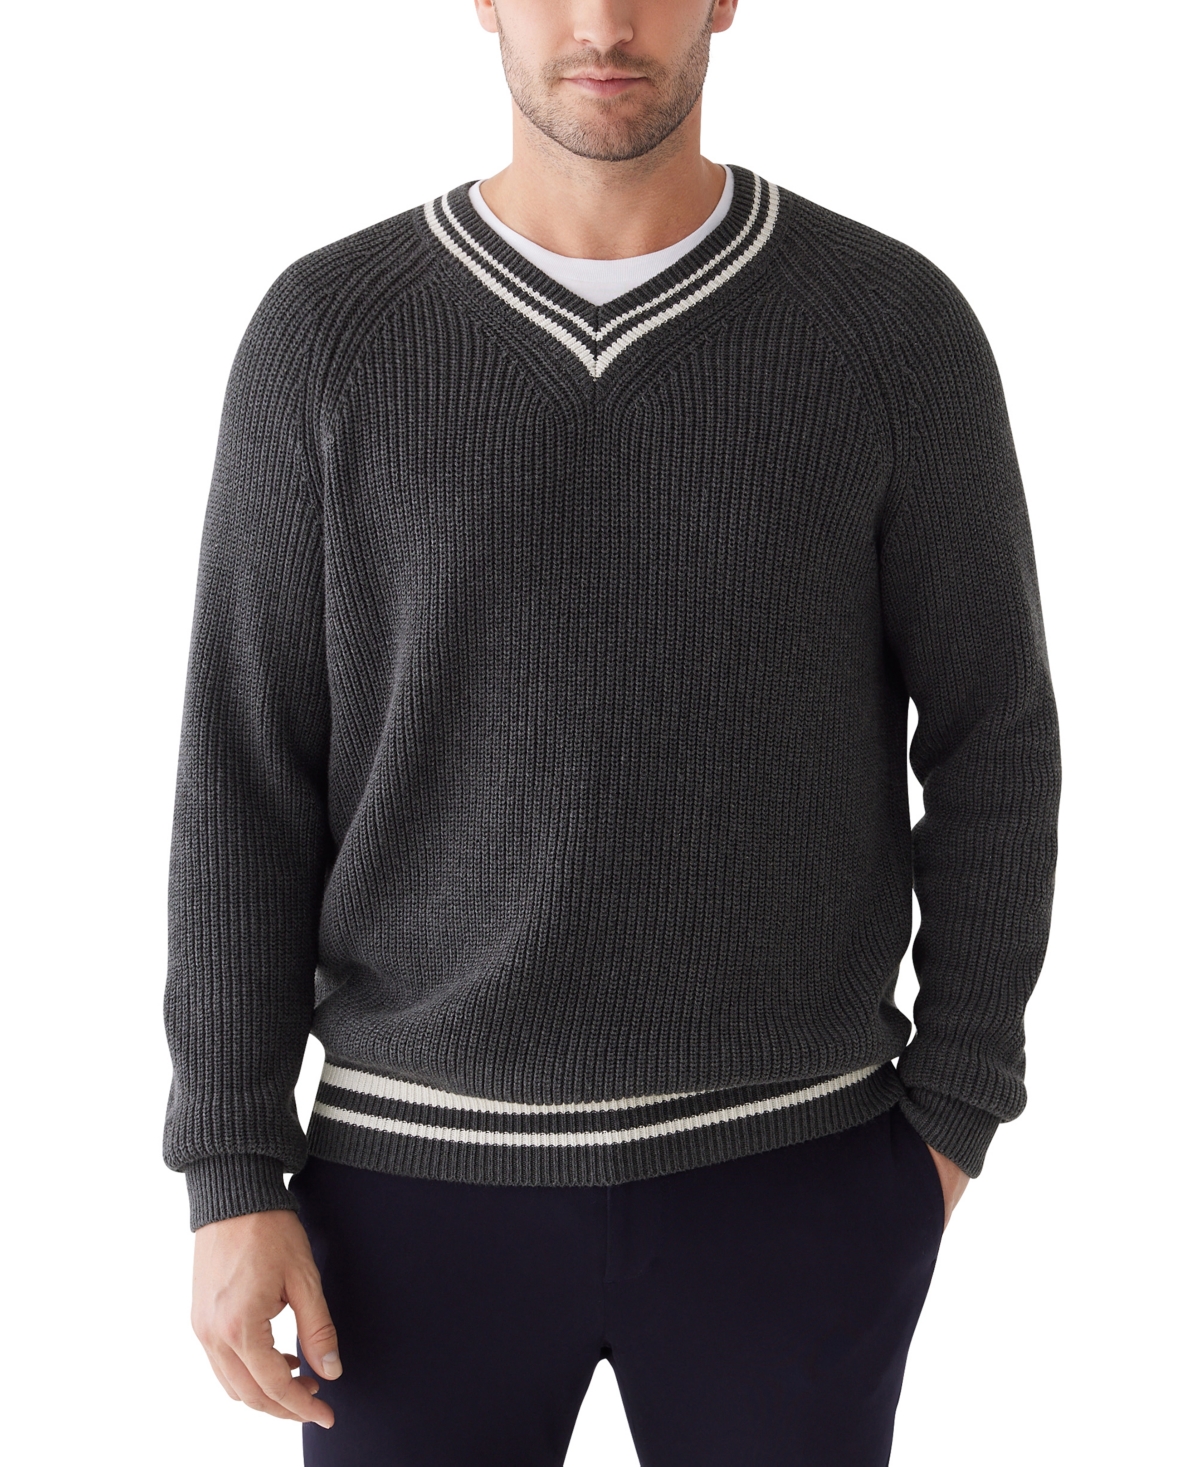 Men's Relaxed Fit V-Neck Long Sleeve Sweater - Dark Grey Heather